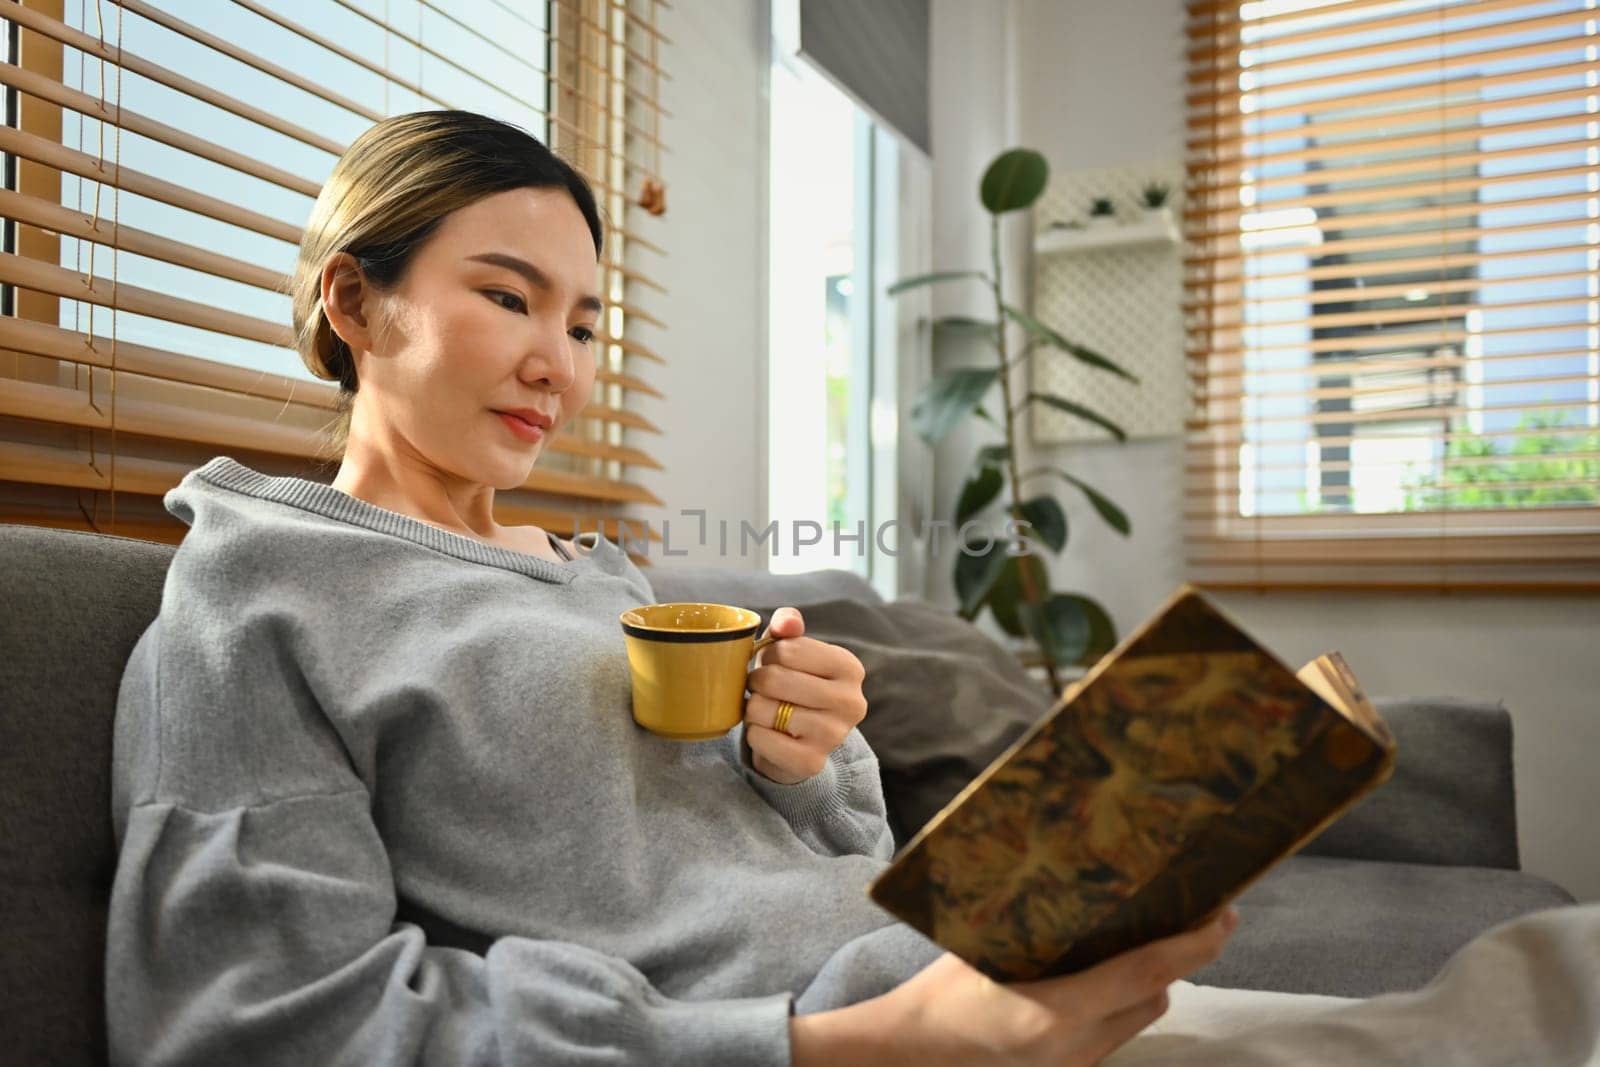 Relaxed young woman drinking hot tea and reading book on couch in living room. People, leisure and lifestyle concept.